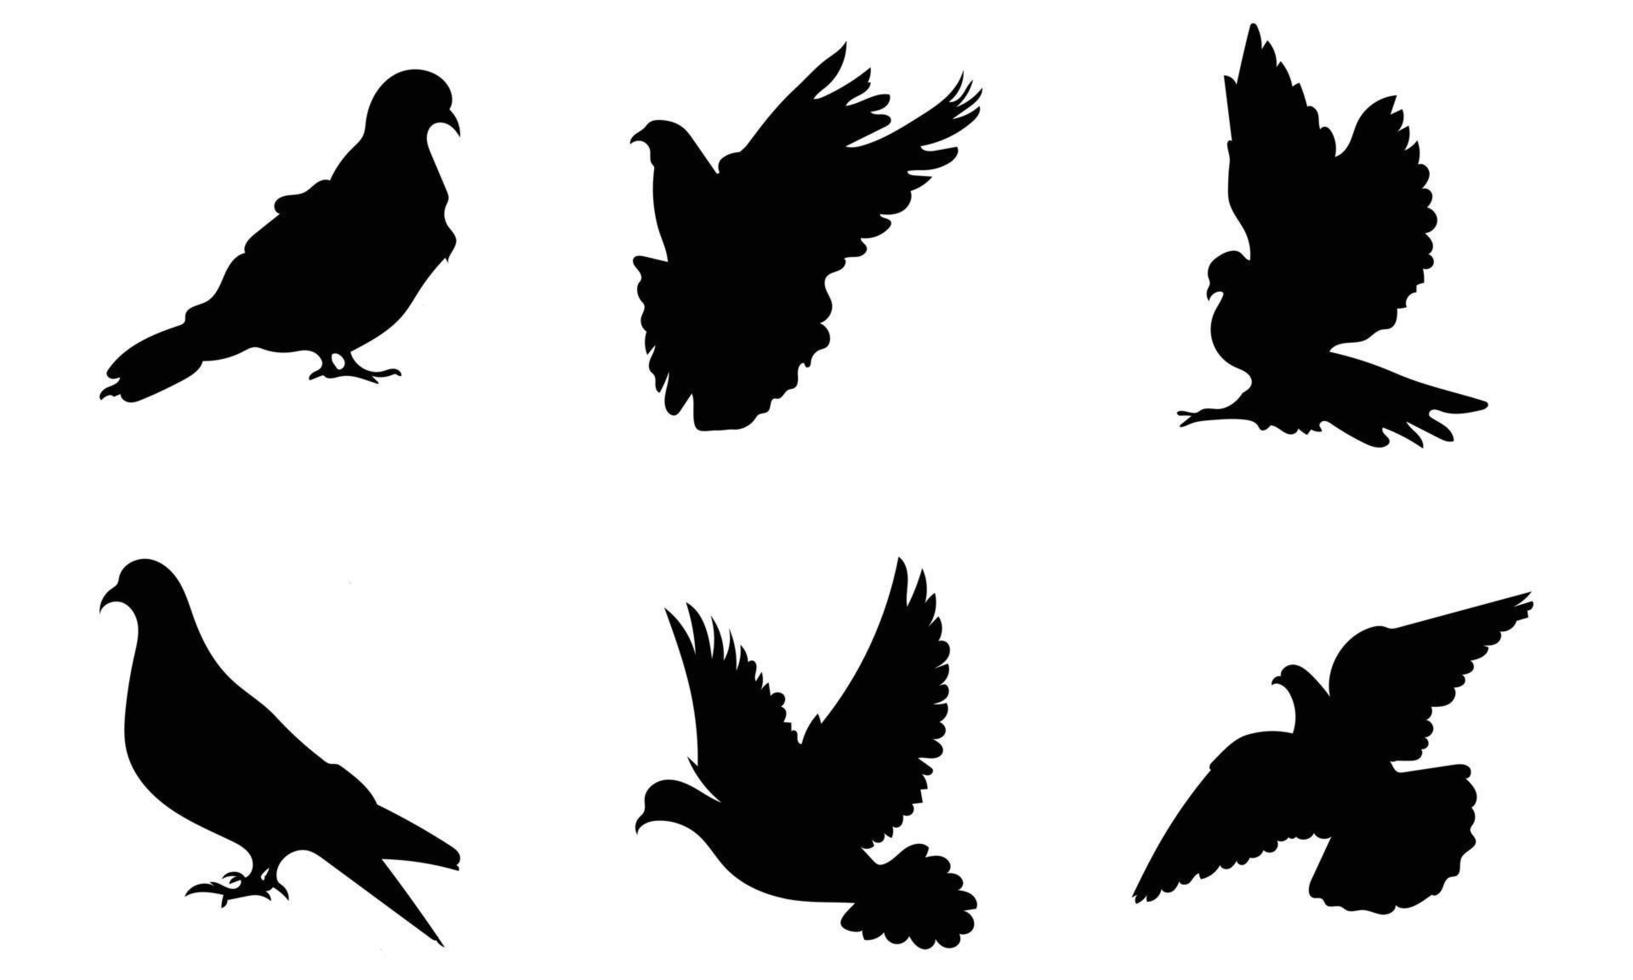 Pigeon silhouette isolated on white background  Vector illustration.